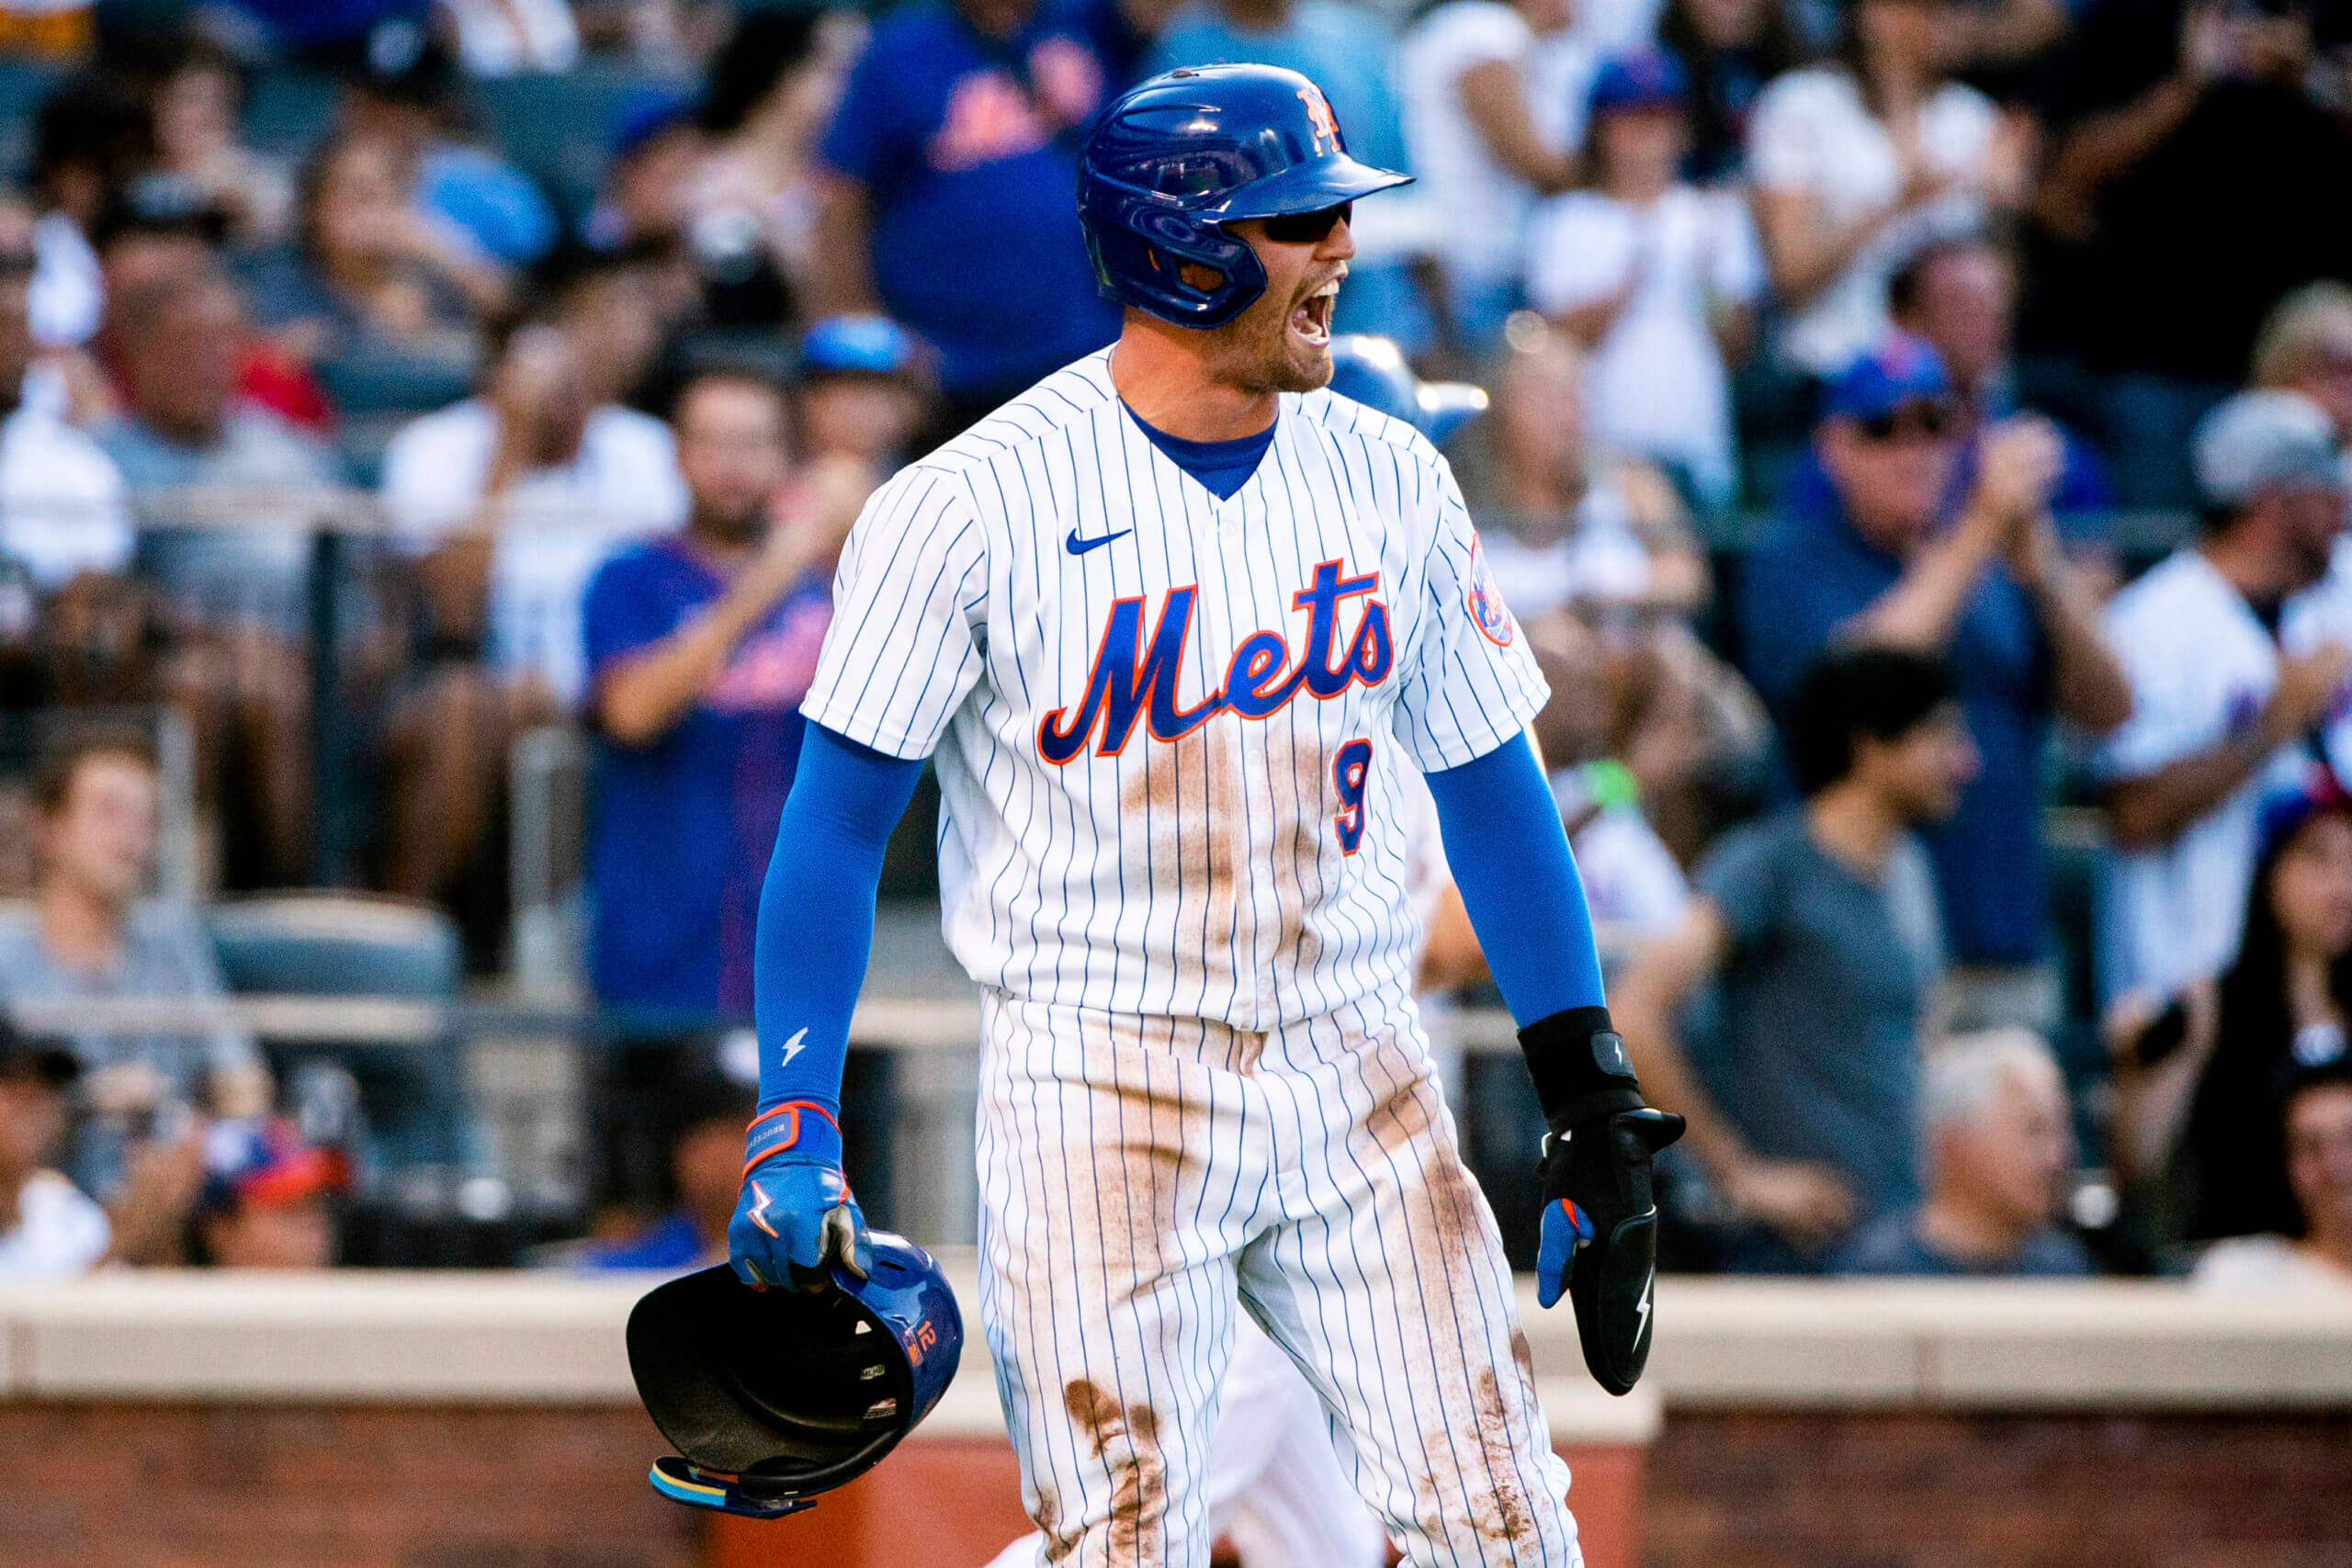 Mets' Brandon Nimmo trying to 'ride the wave' of recent hot streak